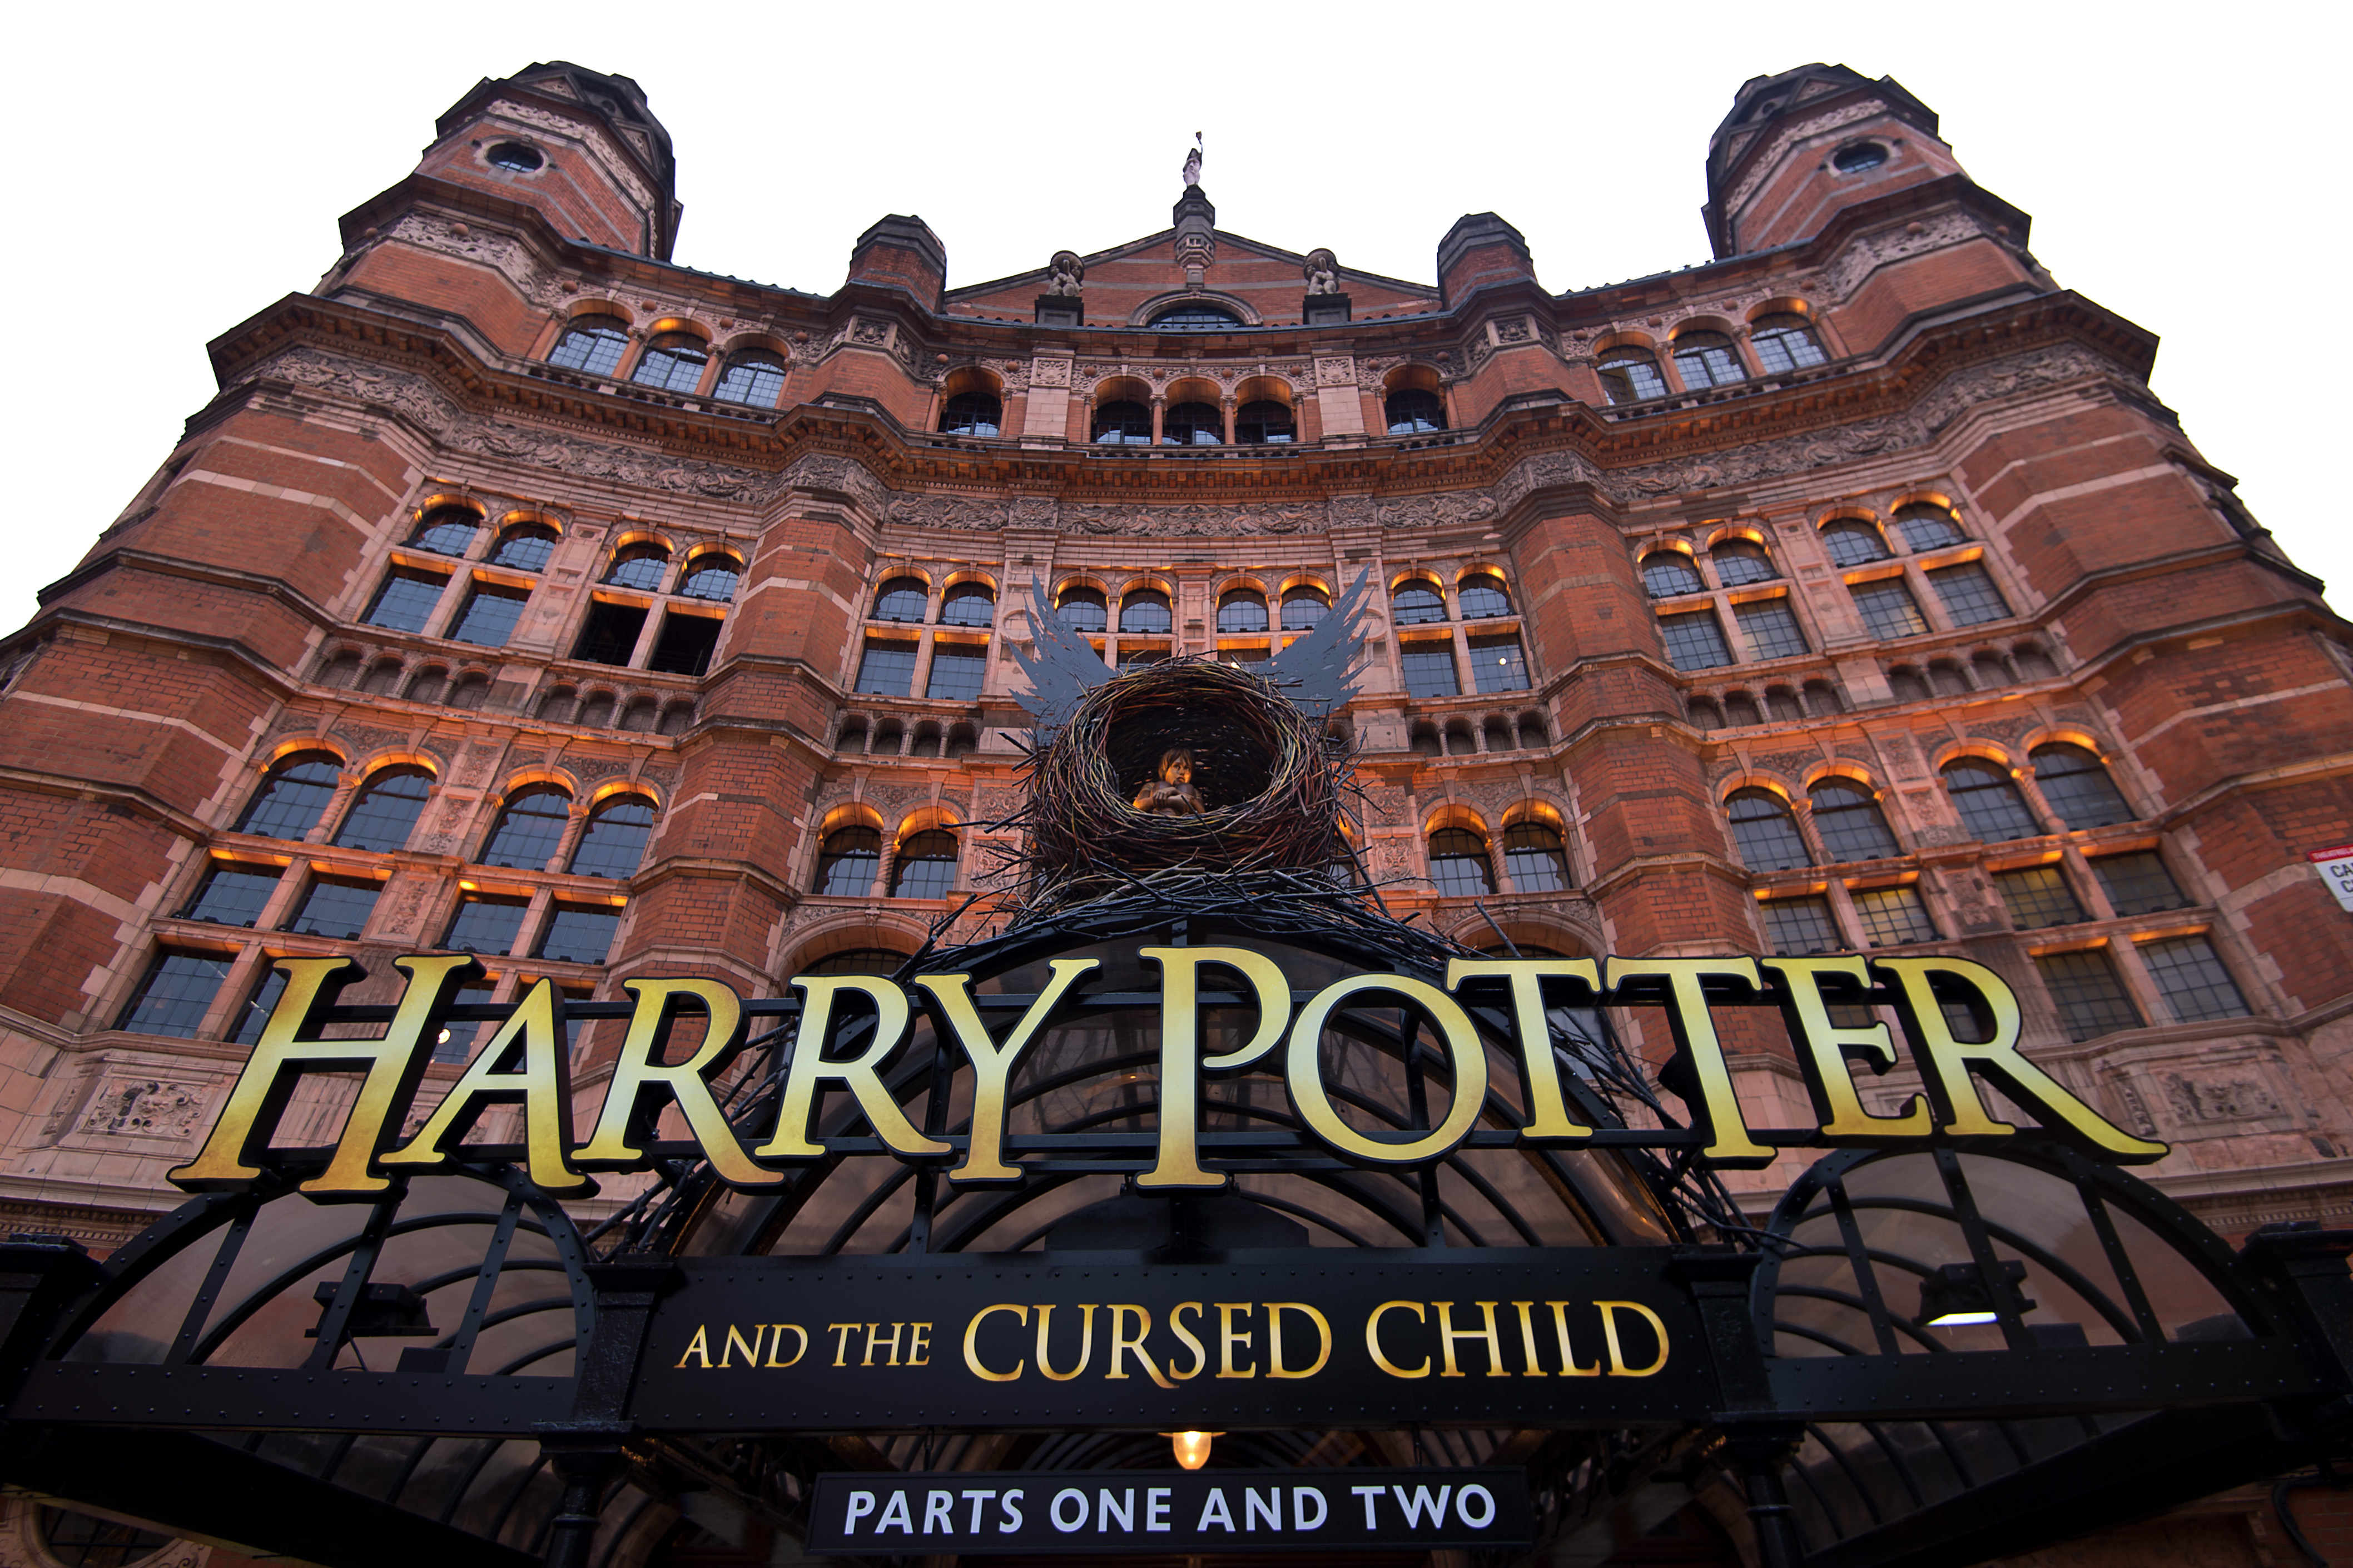 Previews Start For "Harry Potter and the Cursed Child"